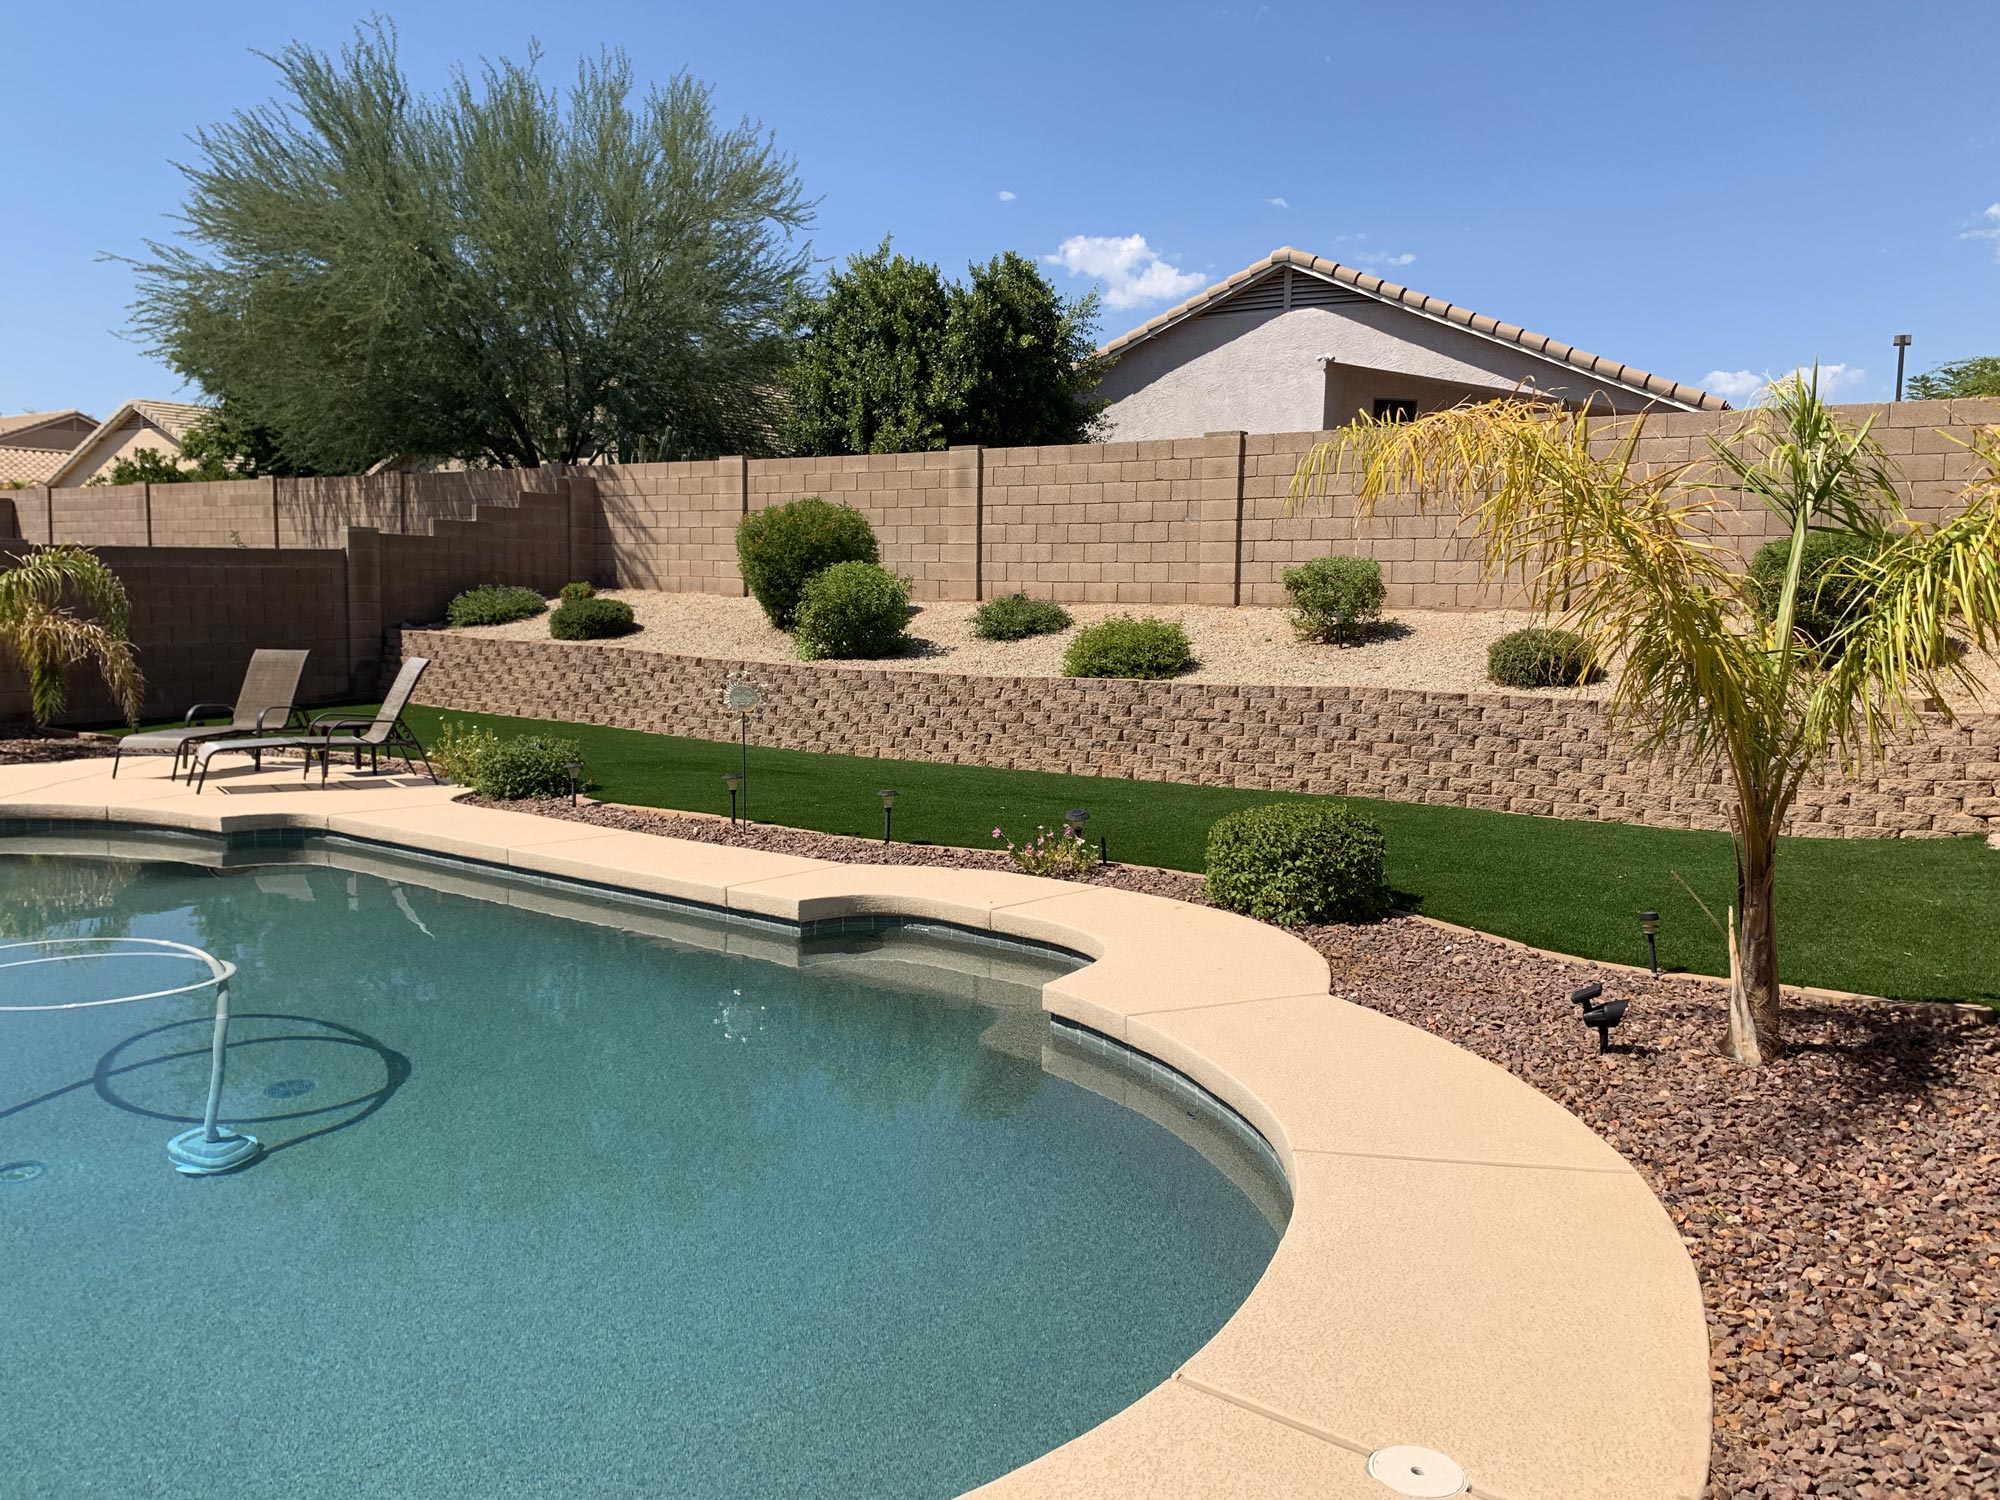 Backyard with beautiful grass and swimming pool | Always Green Turf - Premier Provider of Artificial Grass & Turf in the Phoenix, Arizona area